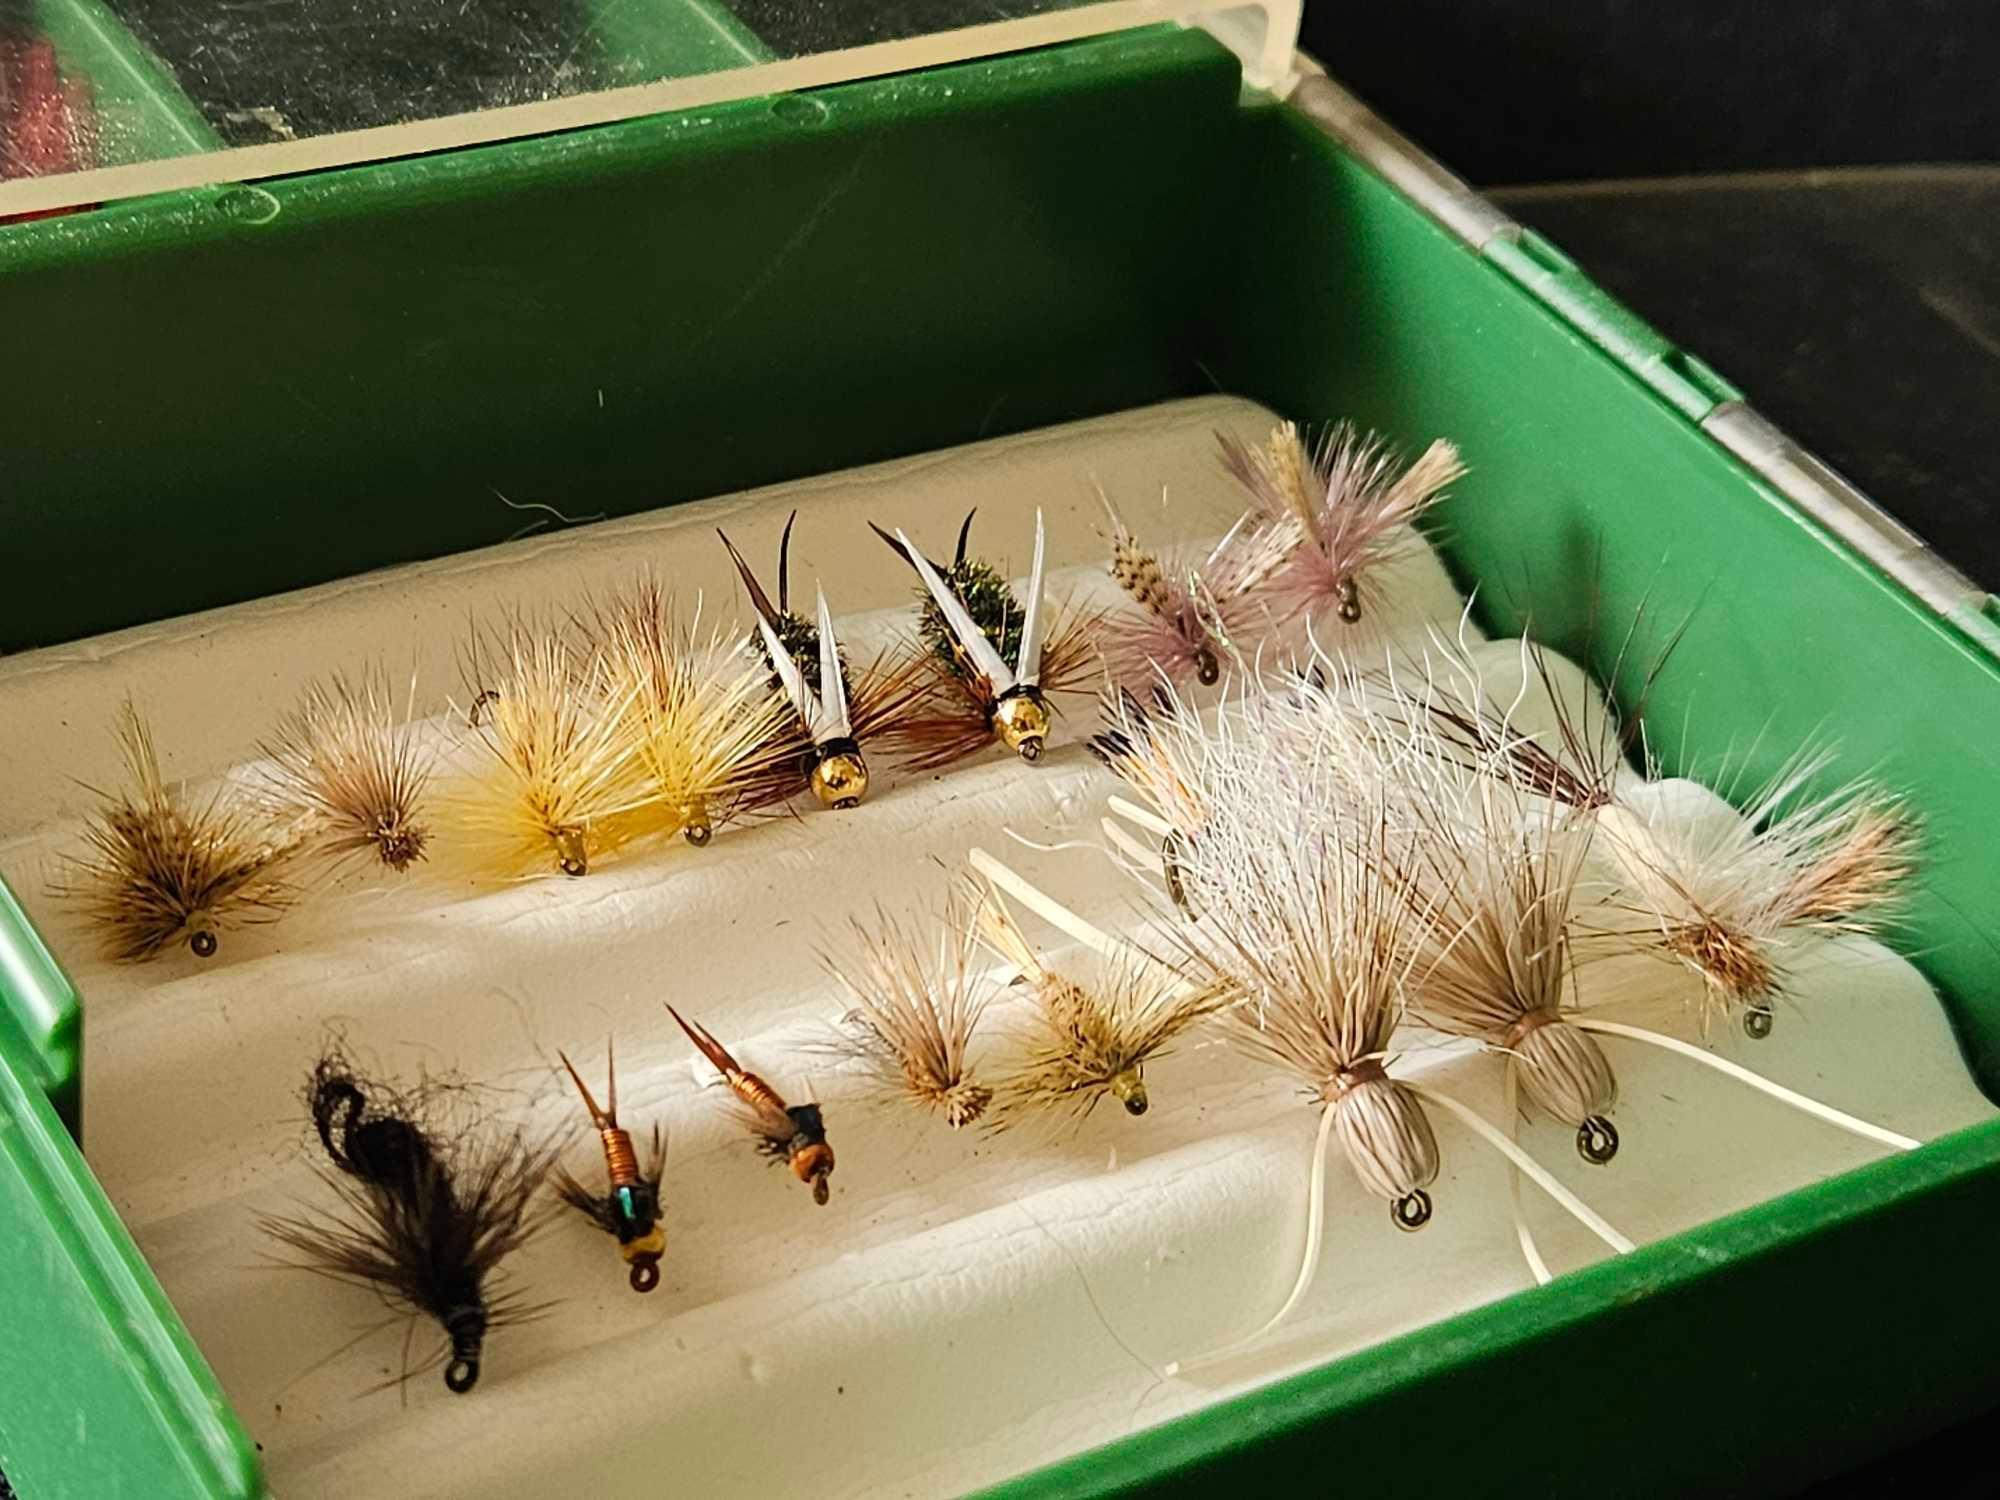 VINTAGE FLY FISHING BOX WITH VERY TINY FLIES PLUS